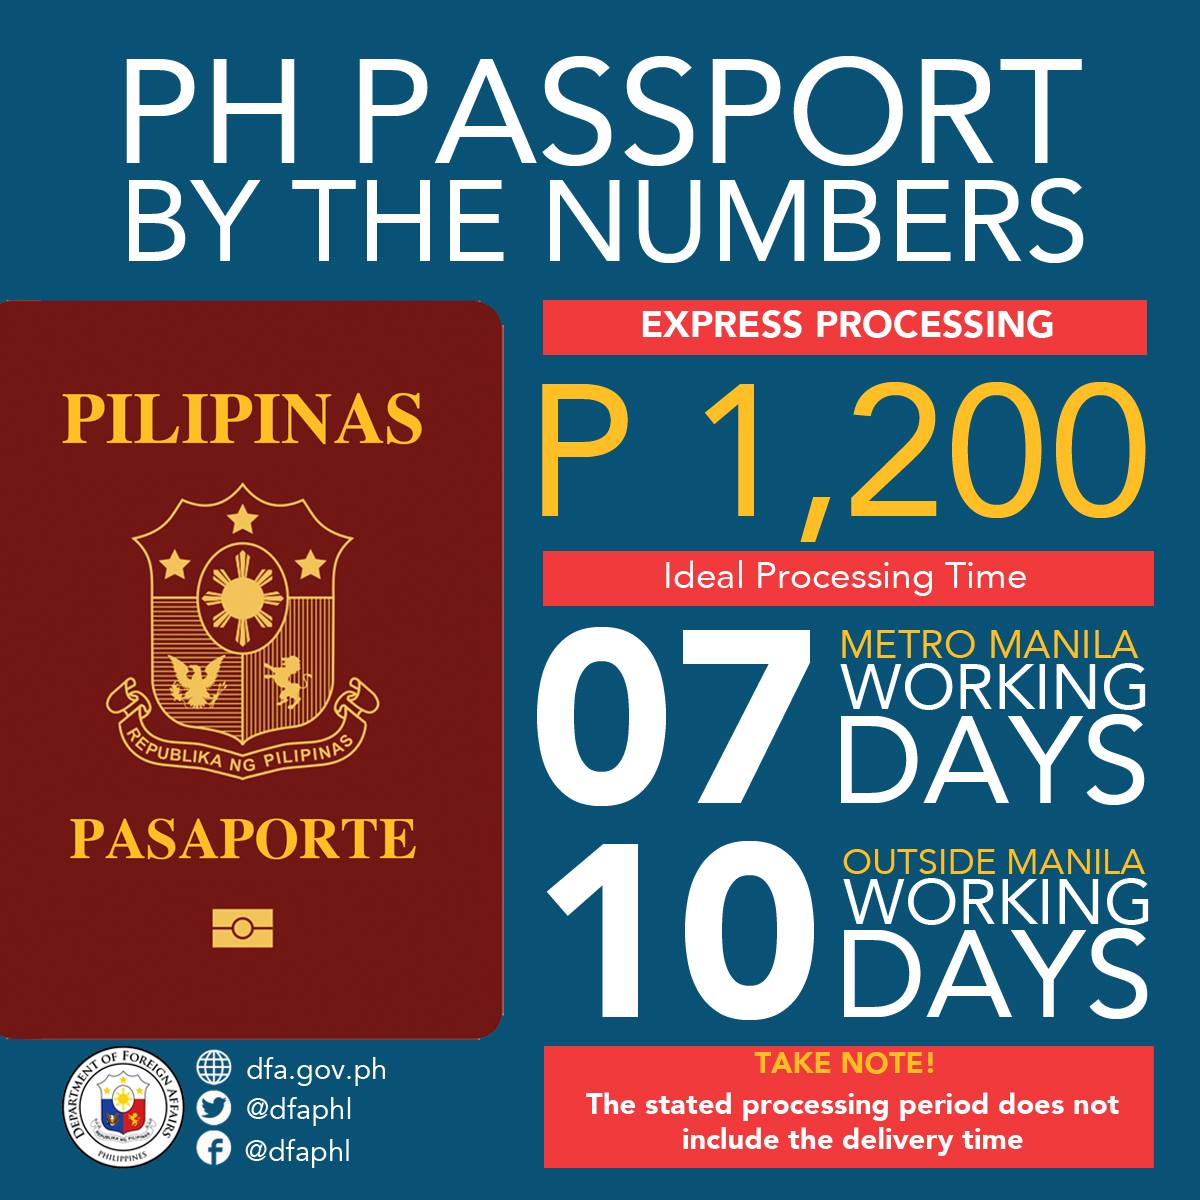 PH Passport 101 Everything You Need to Know When Applying for Passport